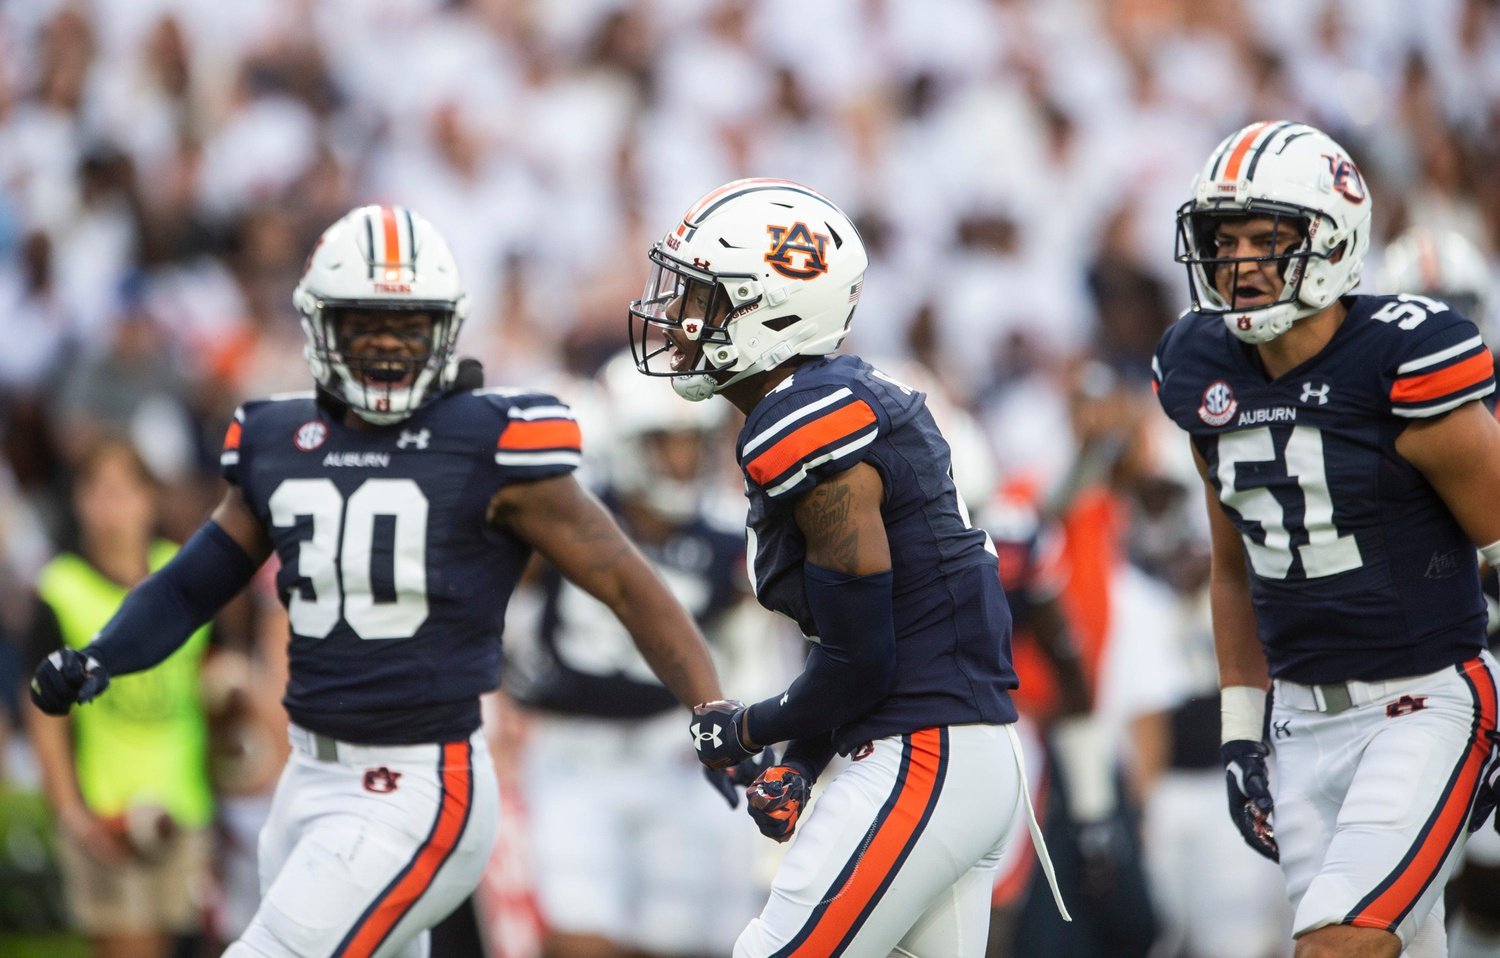 Auburn Tigers Preview Roster, Prospects, Schedule, and More